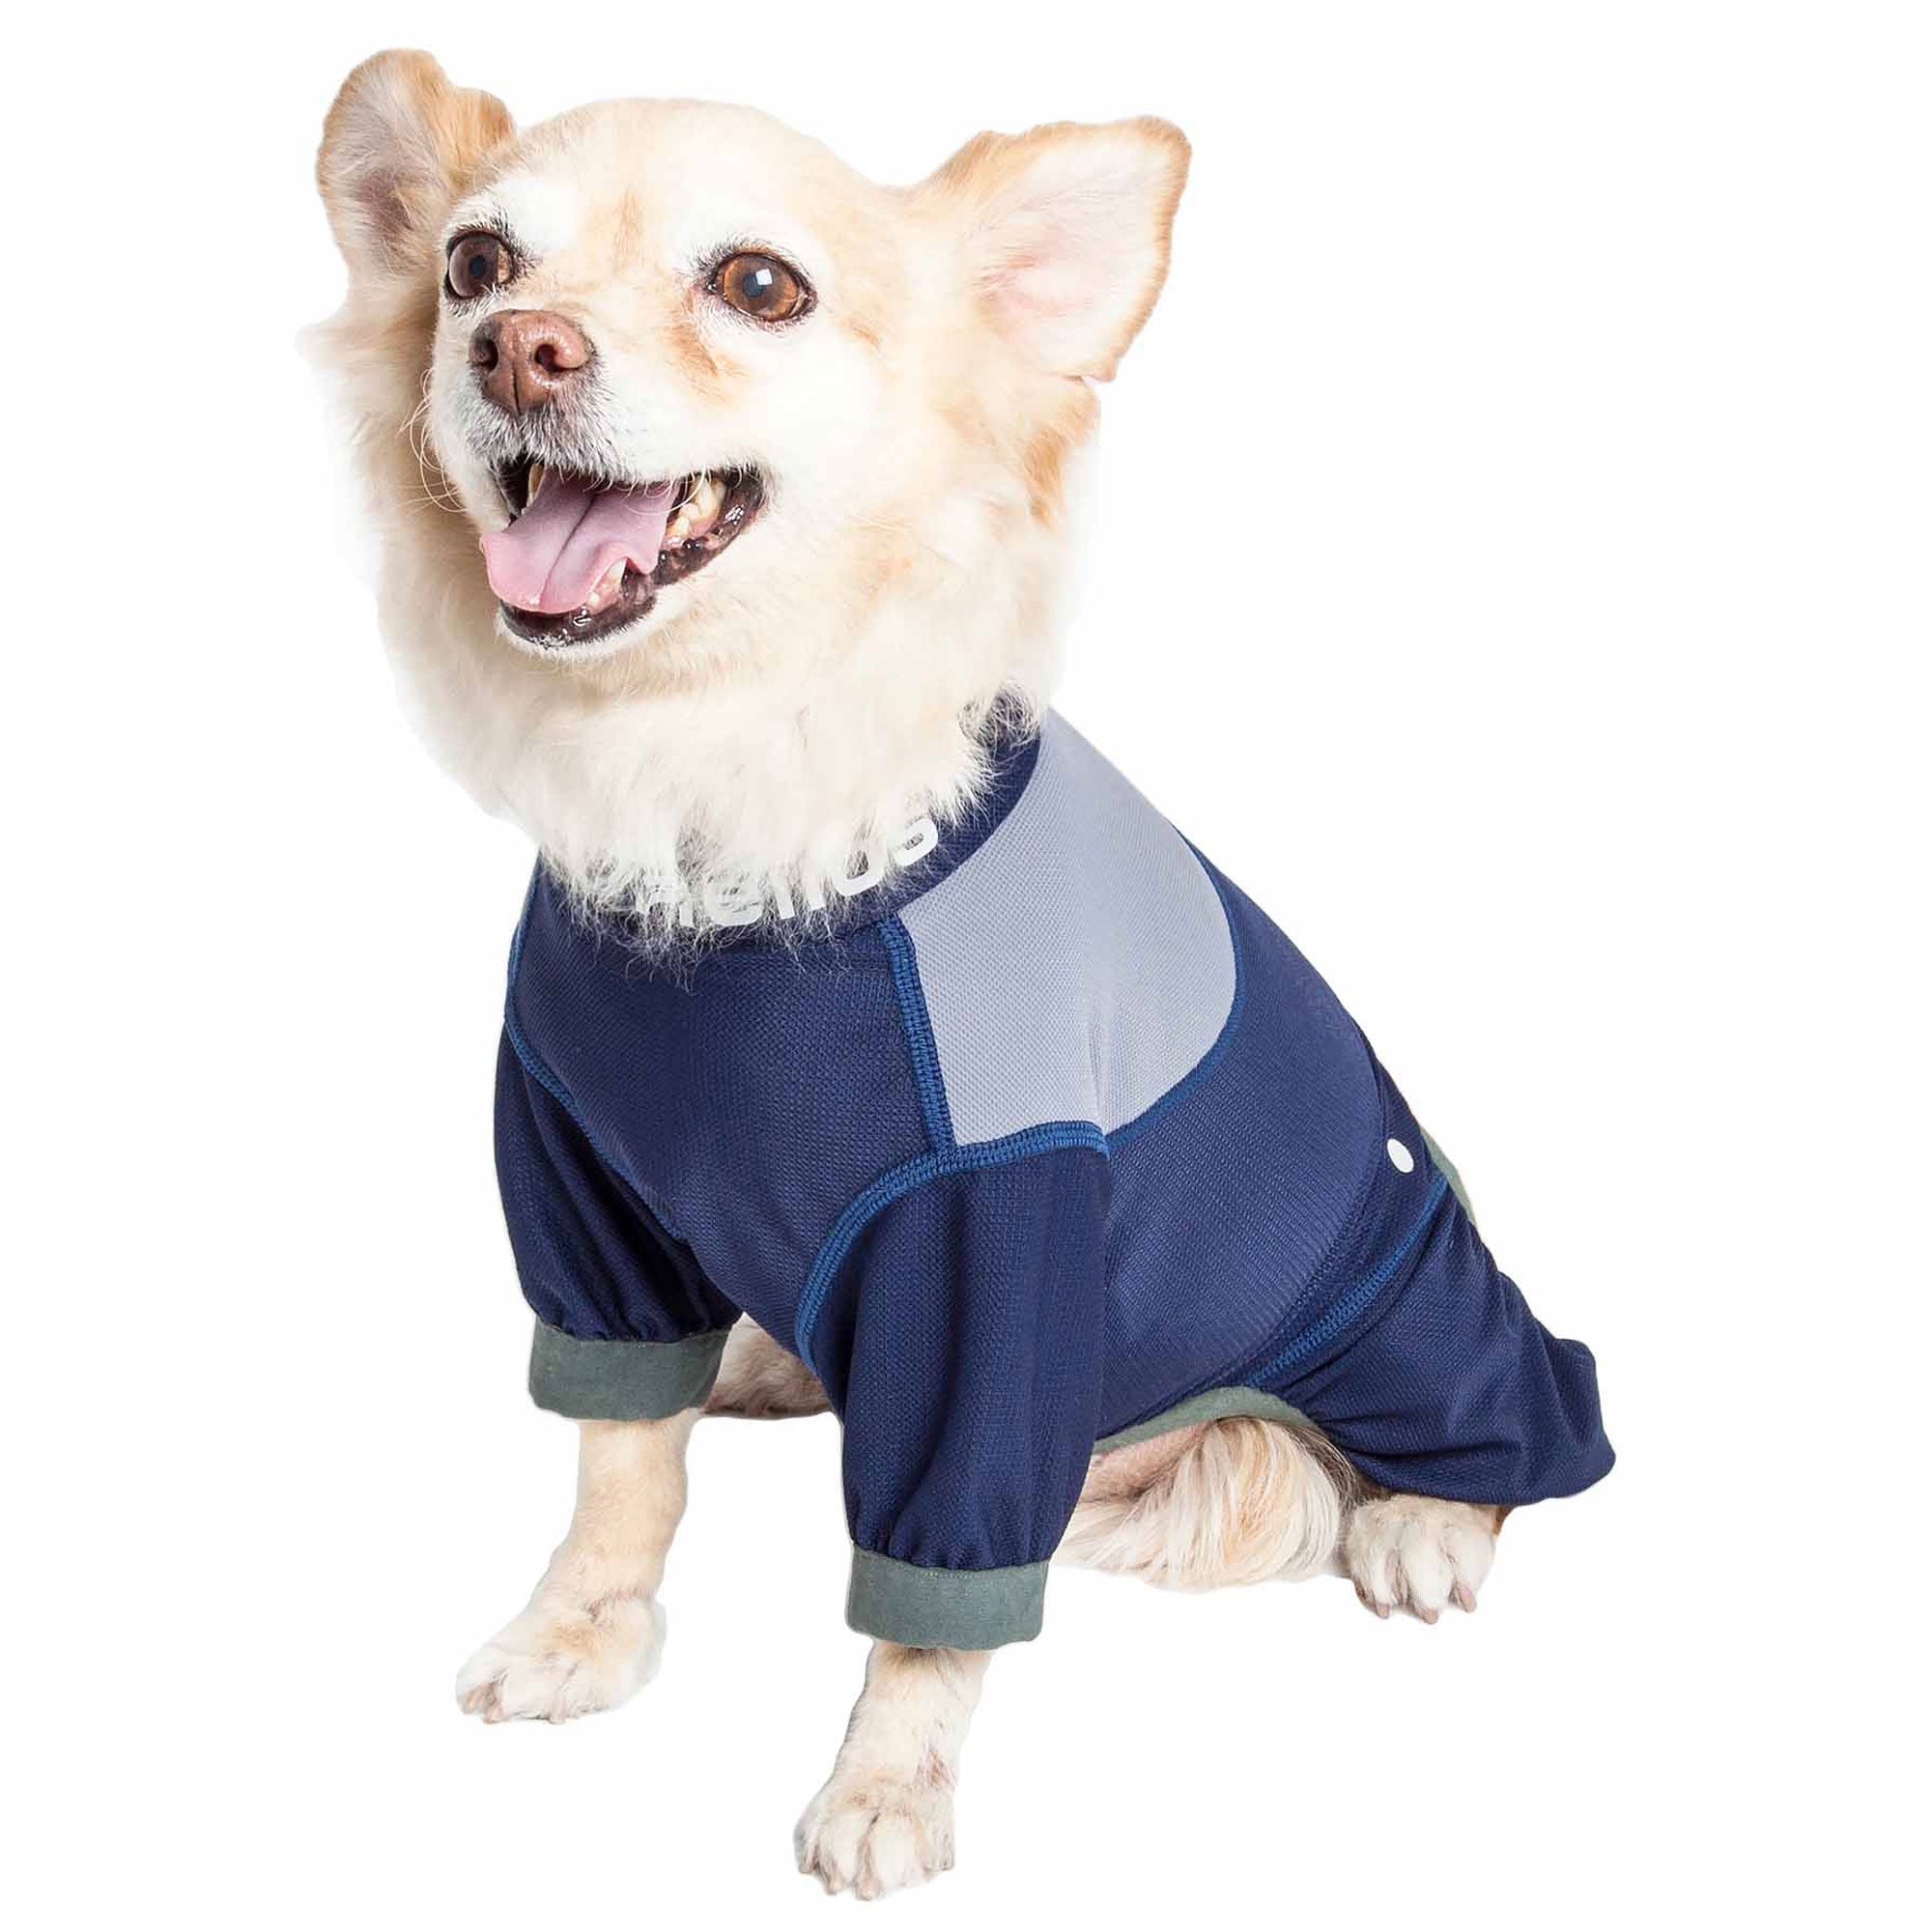 Dog Helios® Tail Runner Dog Track Suit - Gray - X-small